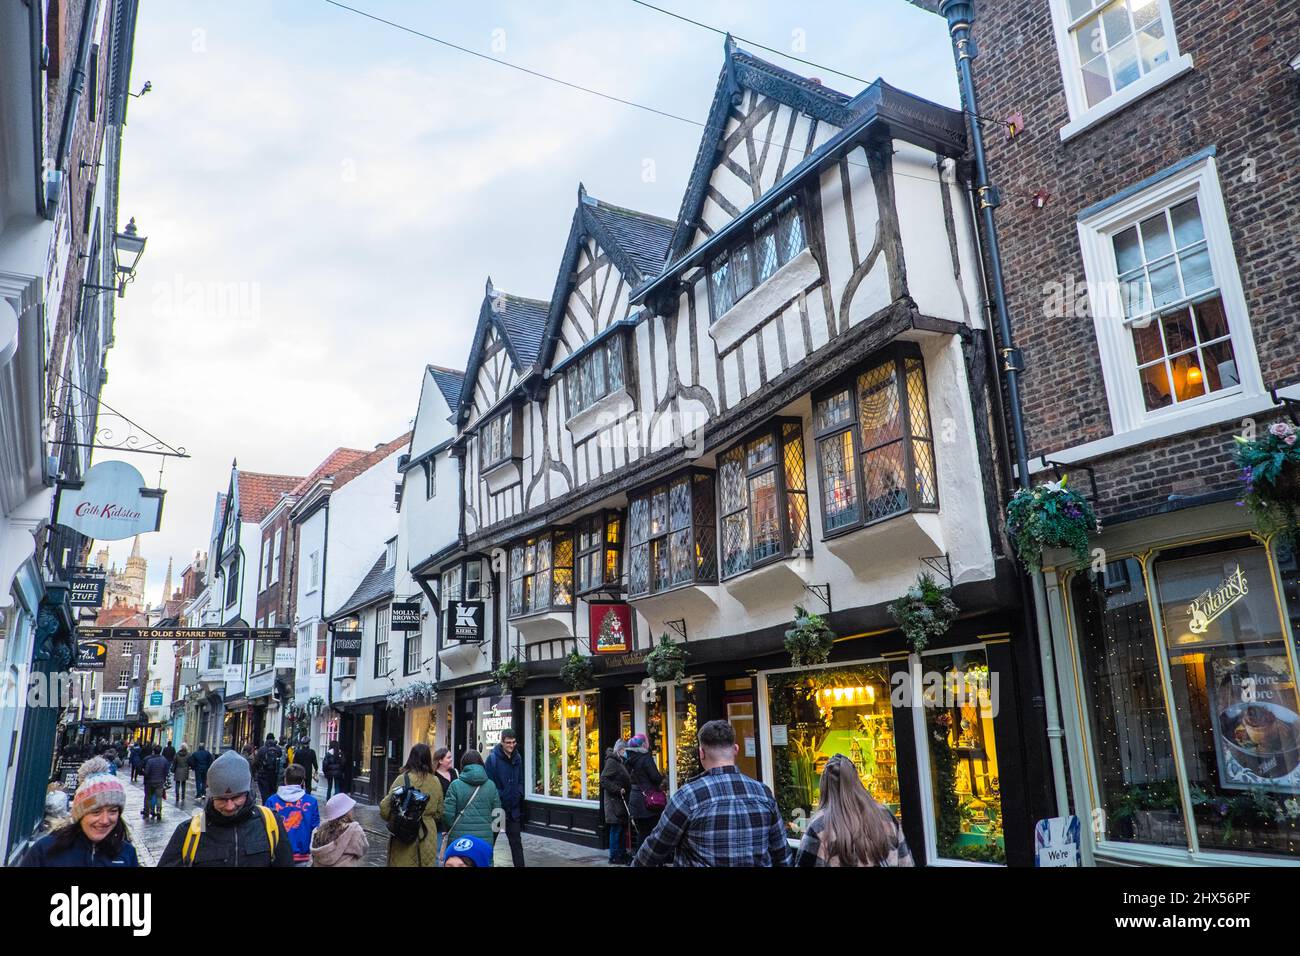 Shopping,old,half-timbered,buildings,along,street,in,York,city,centre,popular,tourist,tourism,attraction,of,in,North Yorkshire,Yorkshire,North East England,England,English,UK,United Kingdom,GB,Great Brtiain,British,Europe, Stock Photo